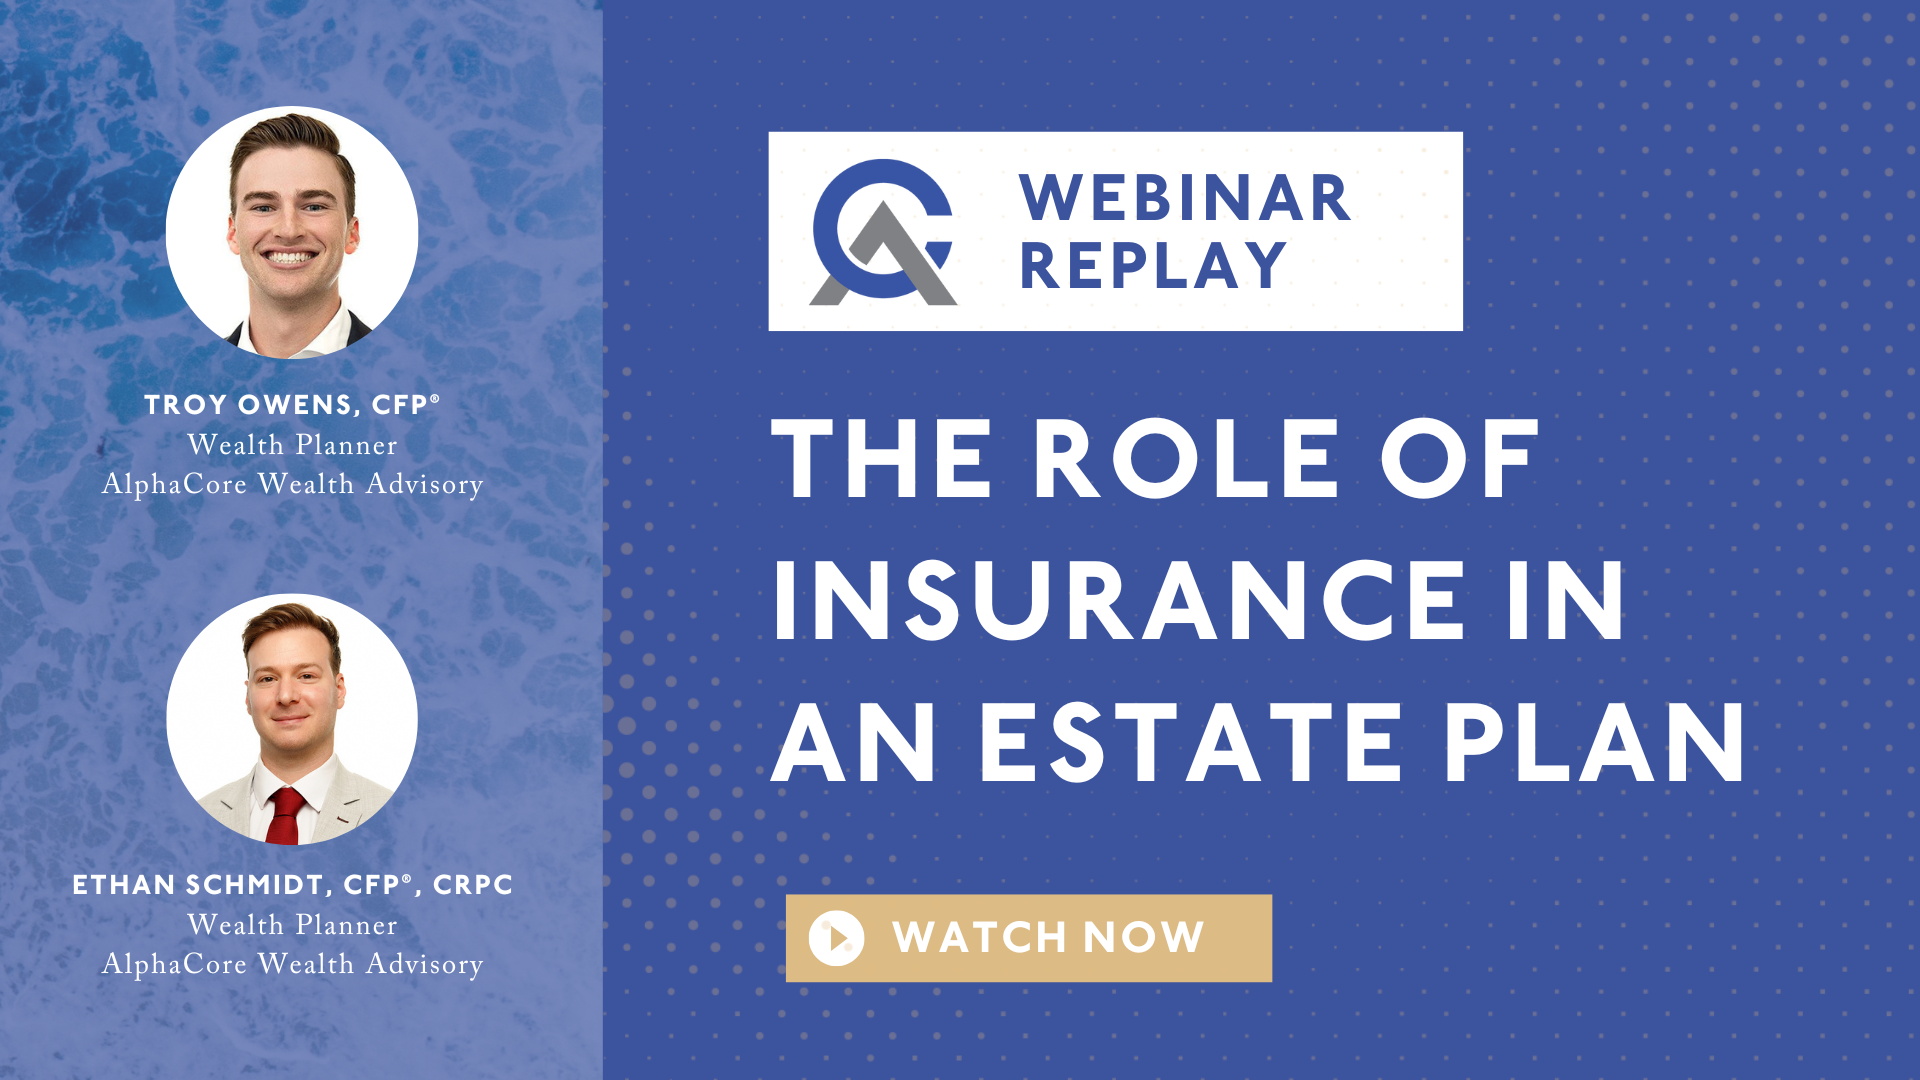 Webinar Replay: The Role of Life Insurance in an Estate Plan